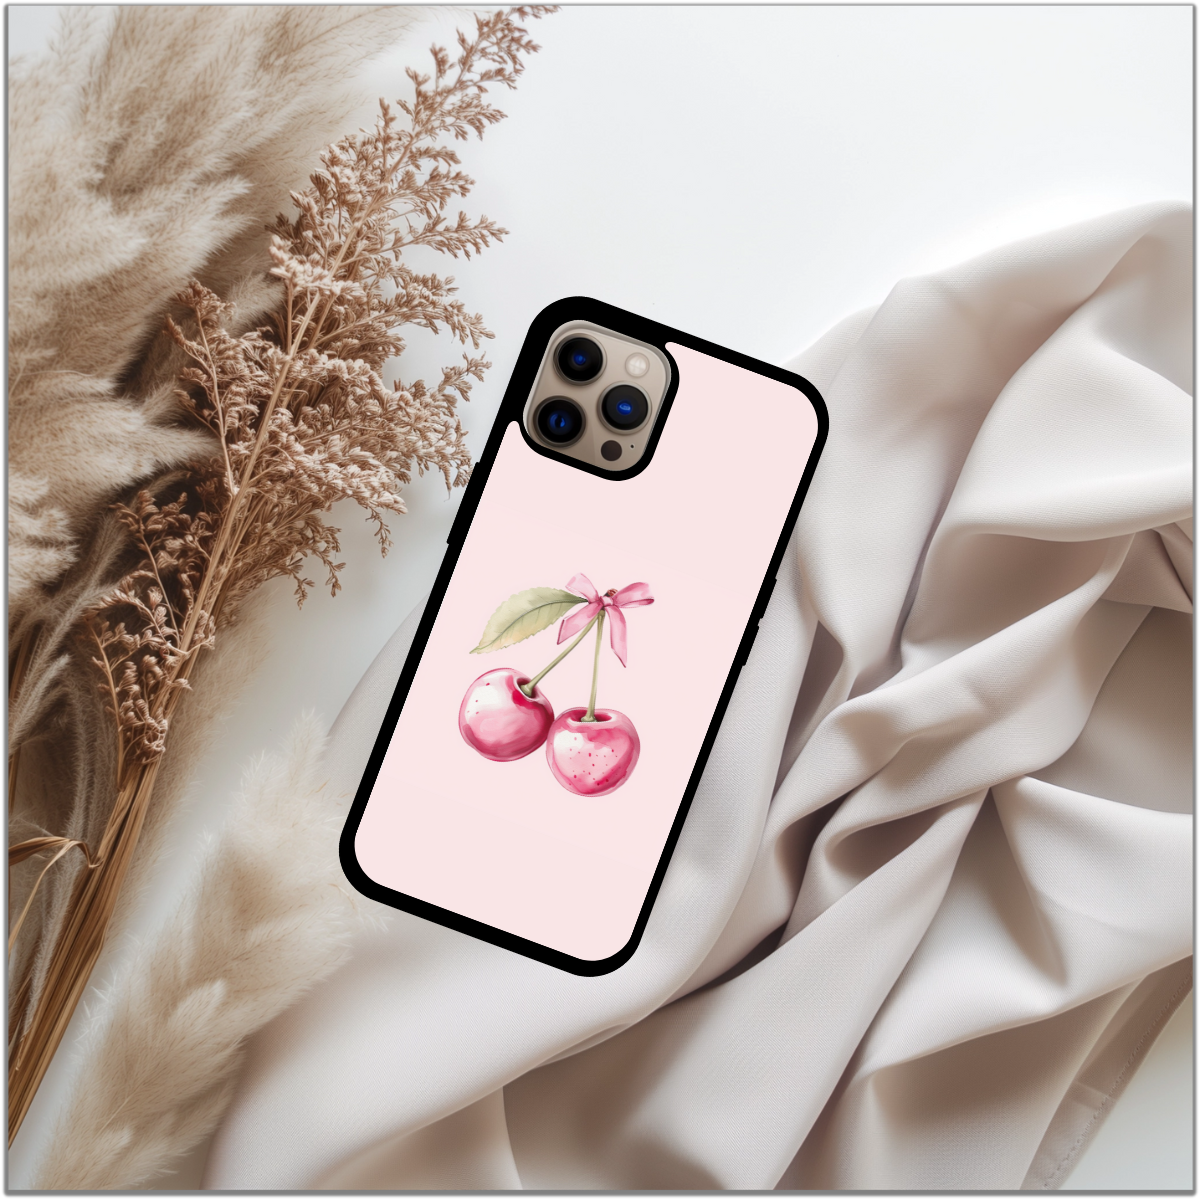 Coquette Phone Case - Cherry phone case the perfect gift for her - cute phone case - best birthday gift - iphone case - girly phone case - pretty phone case - pink phone case